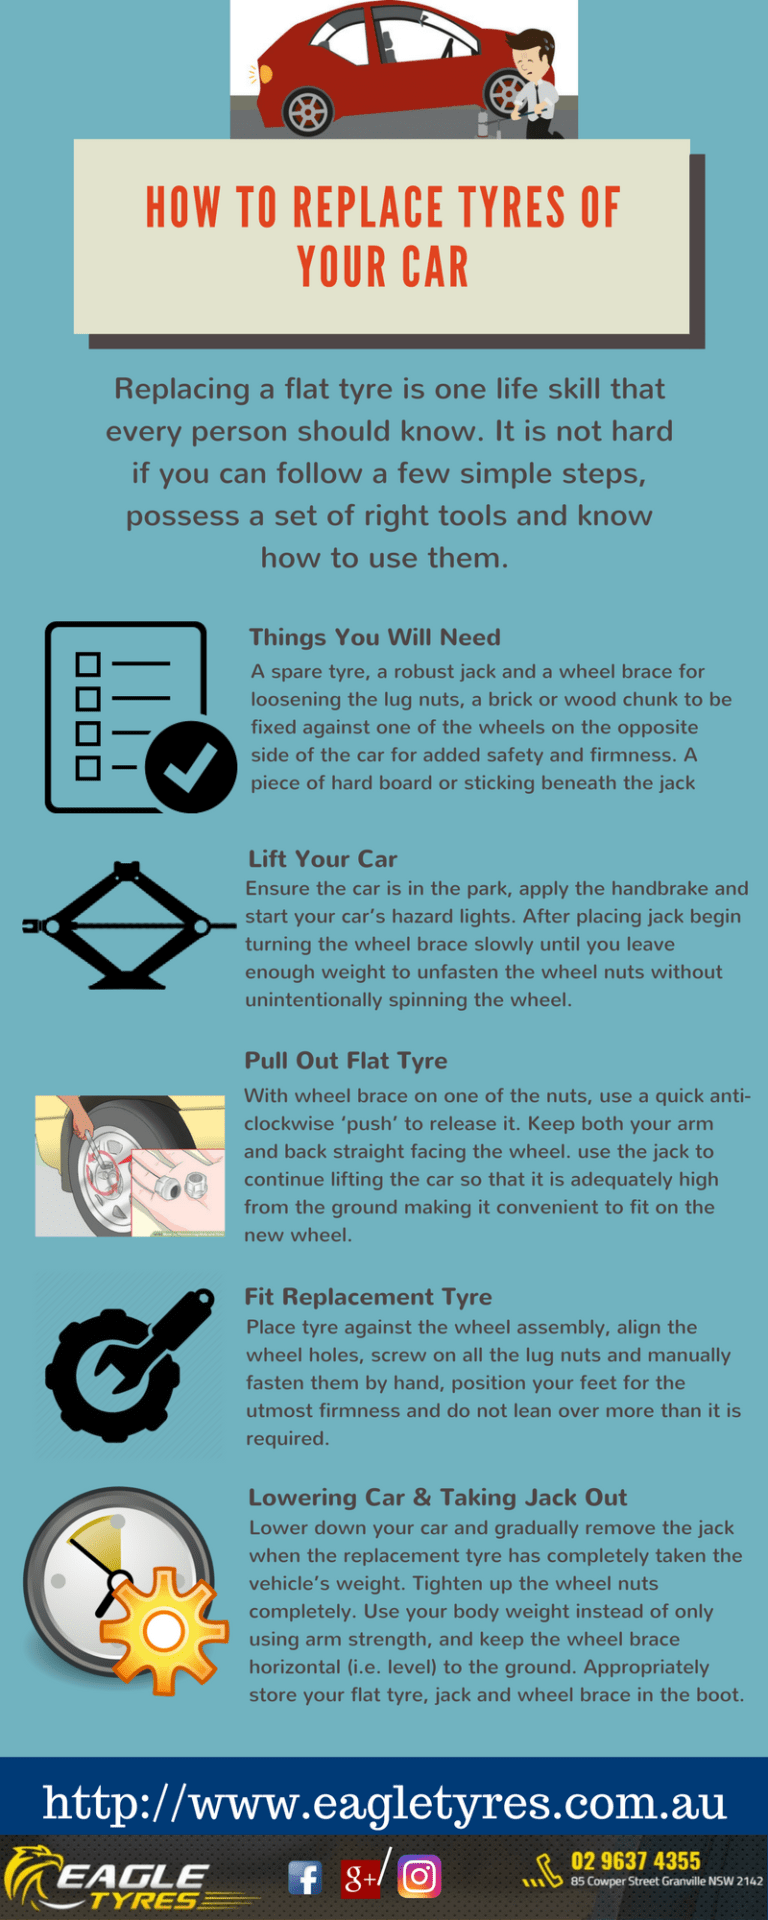 How-to-replace-tyres-of-your-car